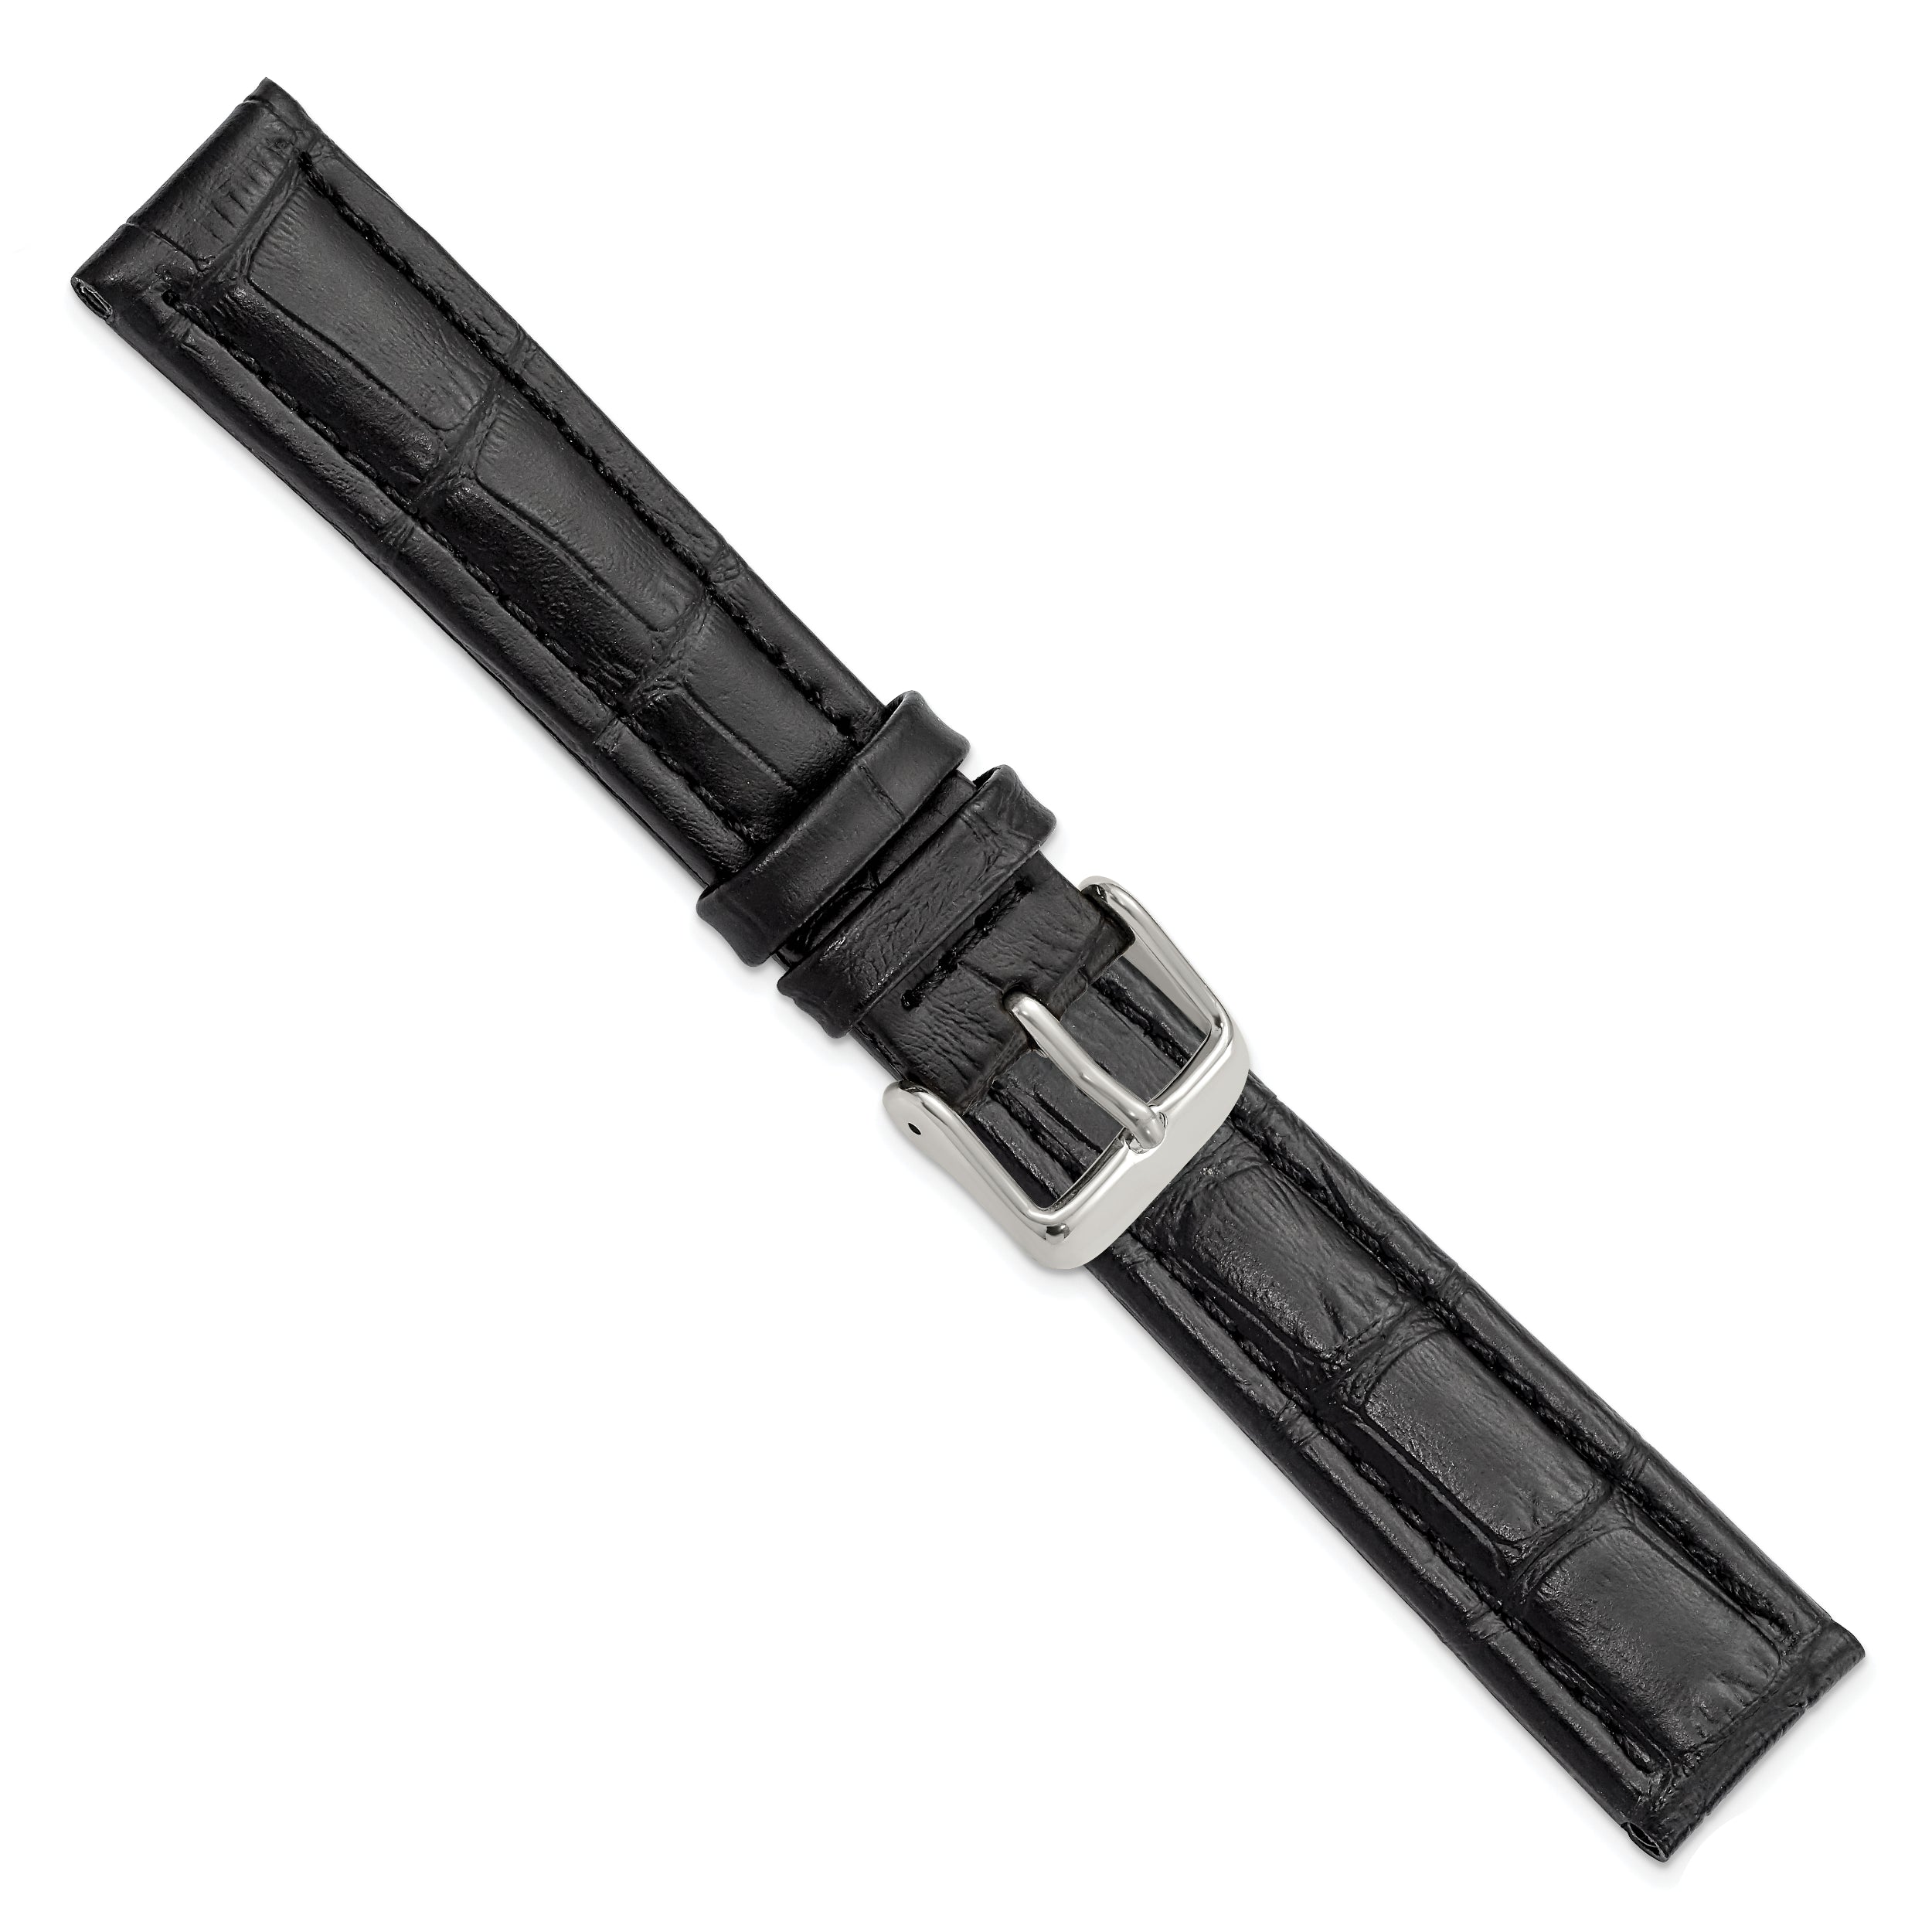 14mm Black Matte Alligator Grain Leather with Silver-tone Buckle 6.75 inch Watch Band